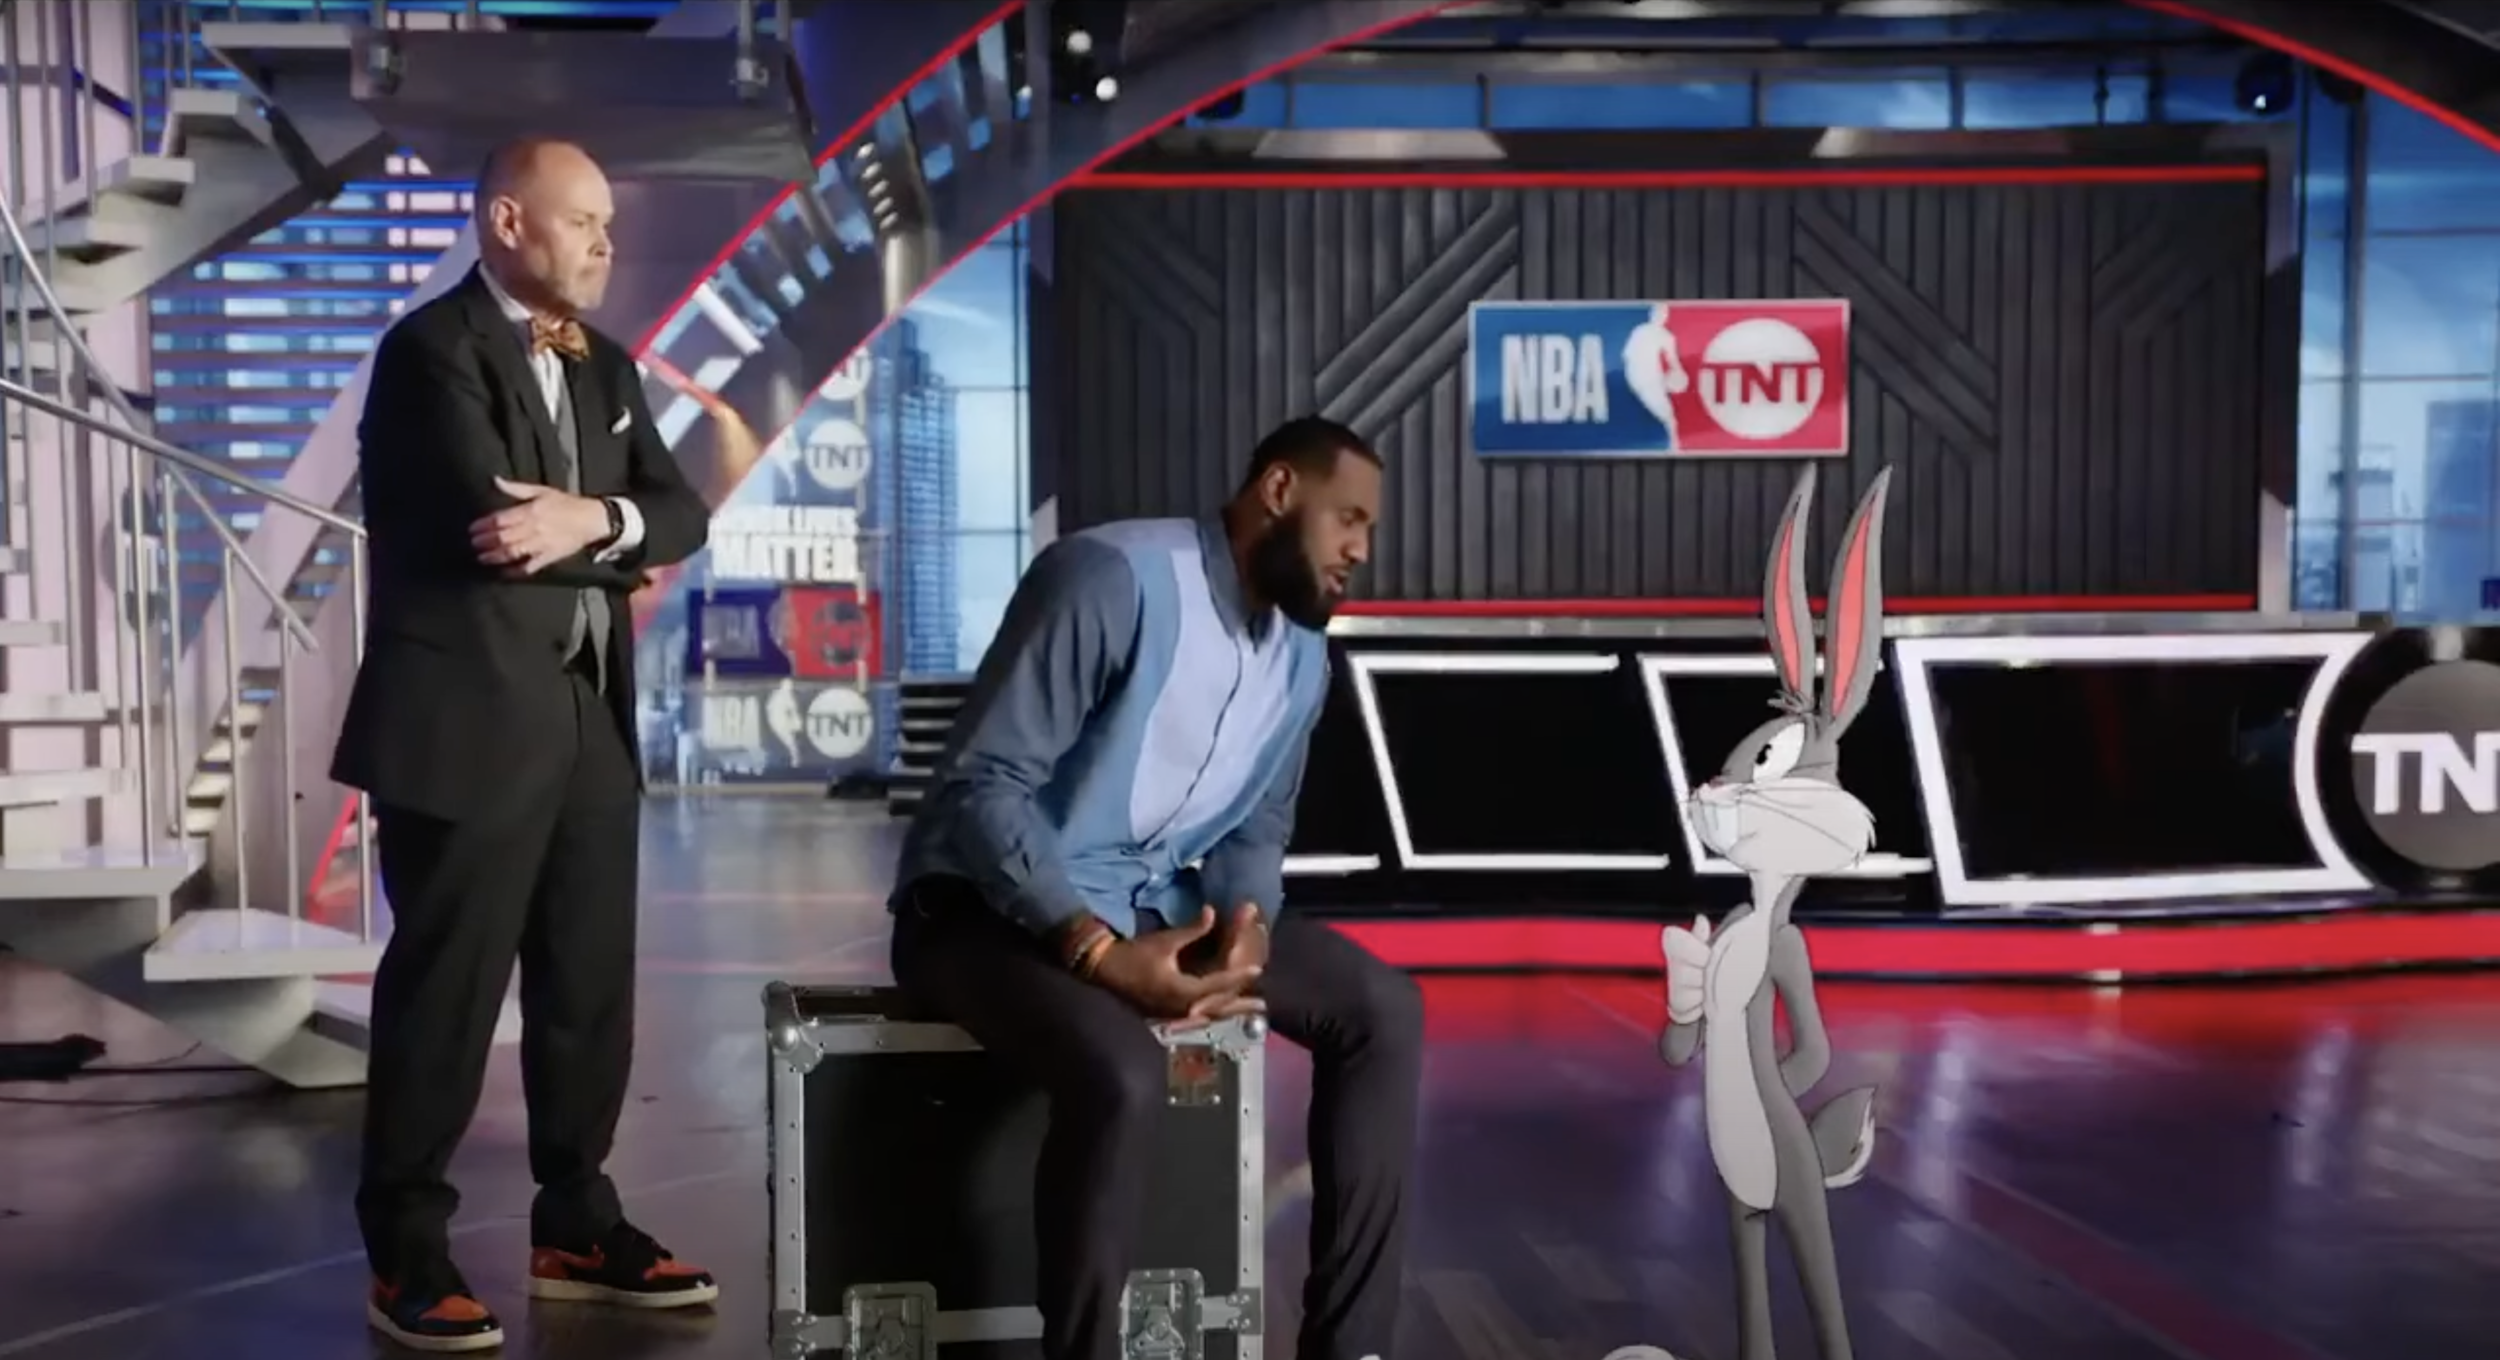 Space Jam: A New Legacy / Inside the NBA on TNT